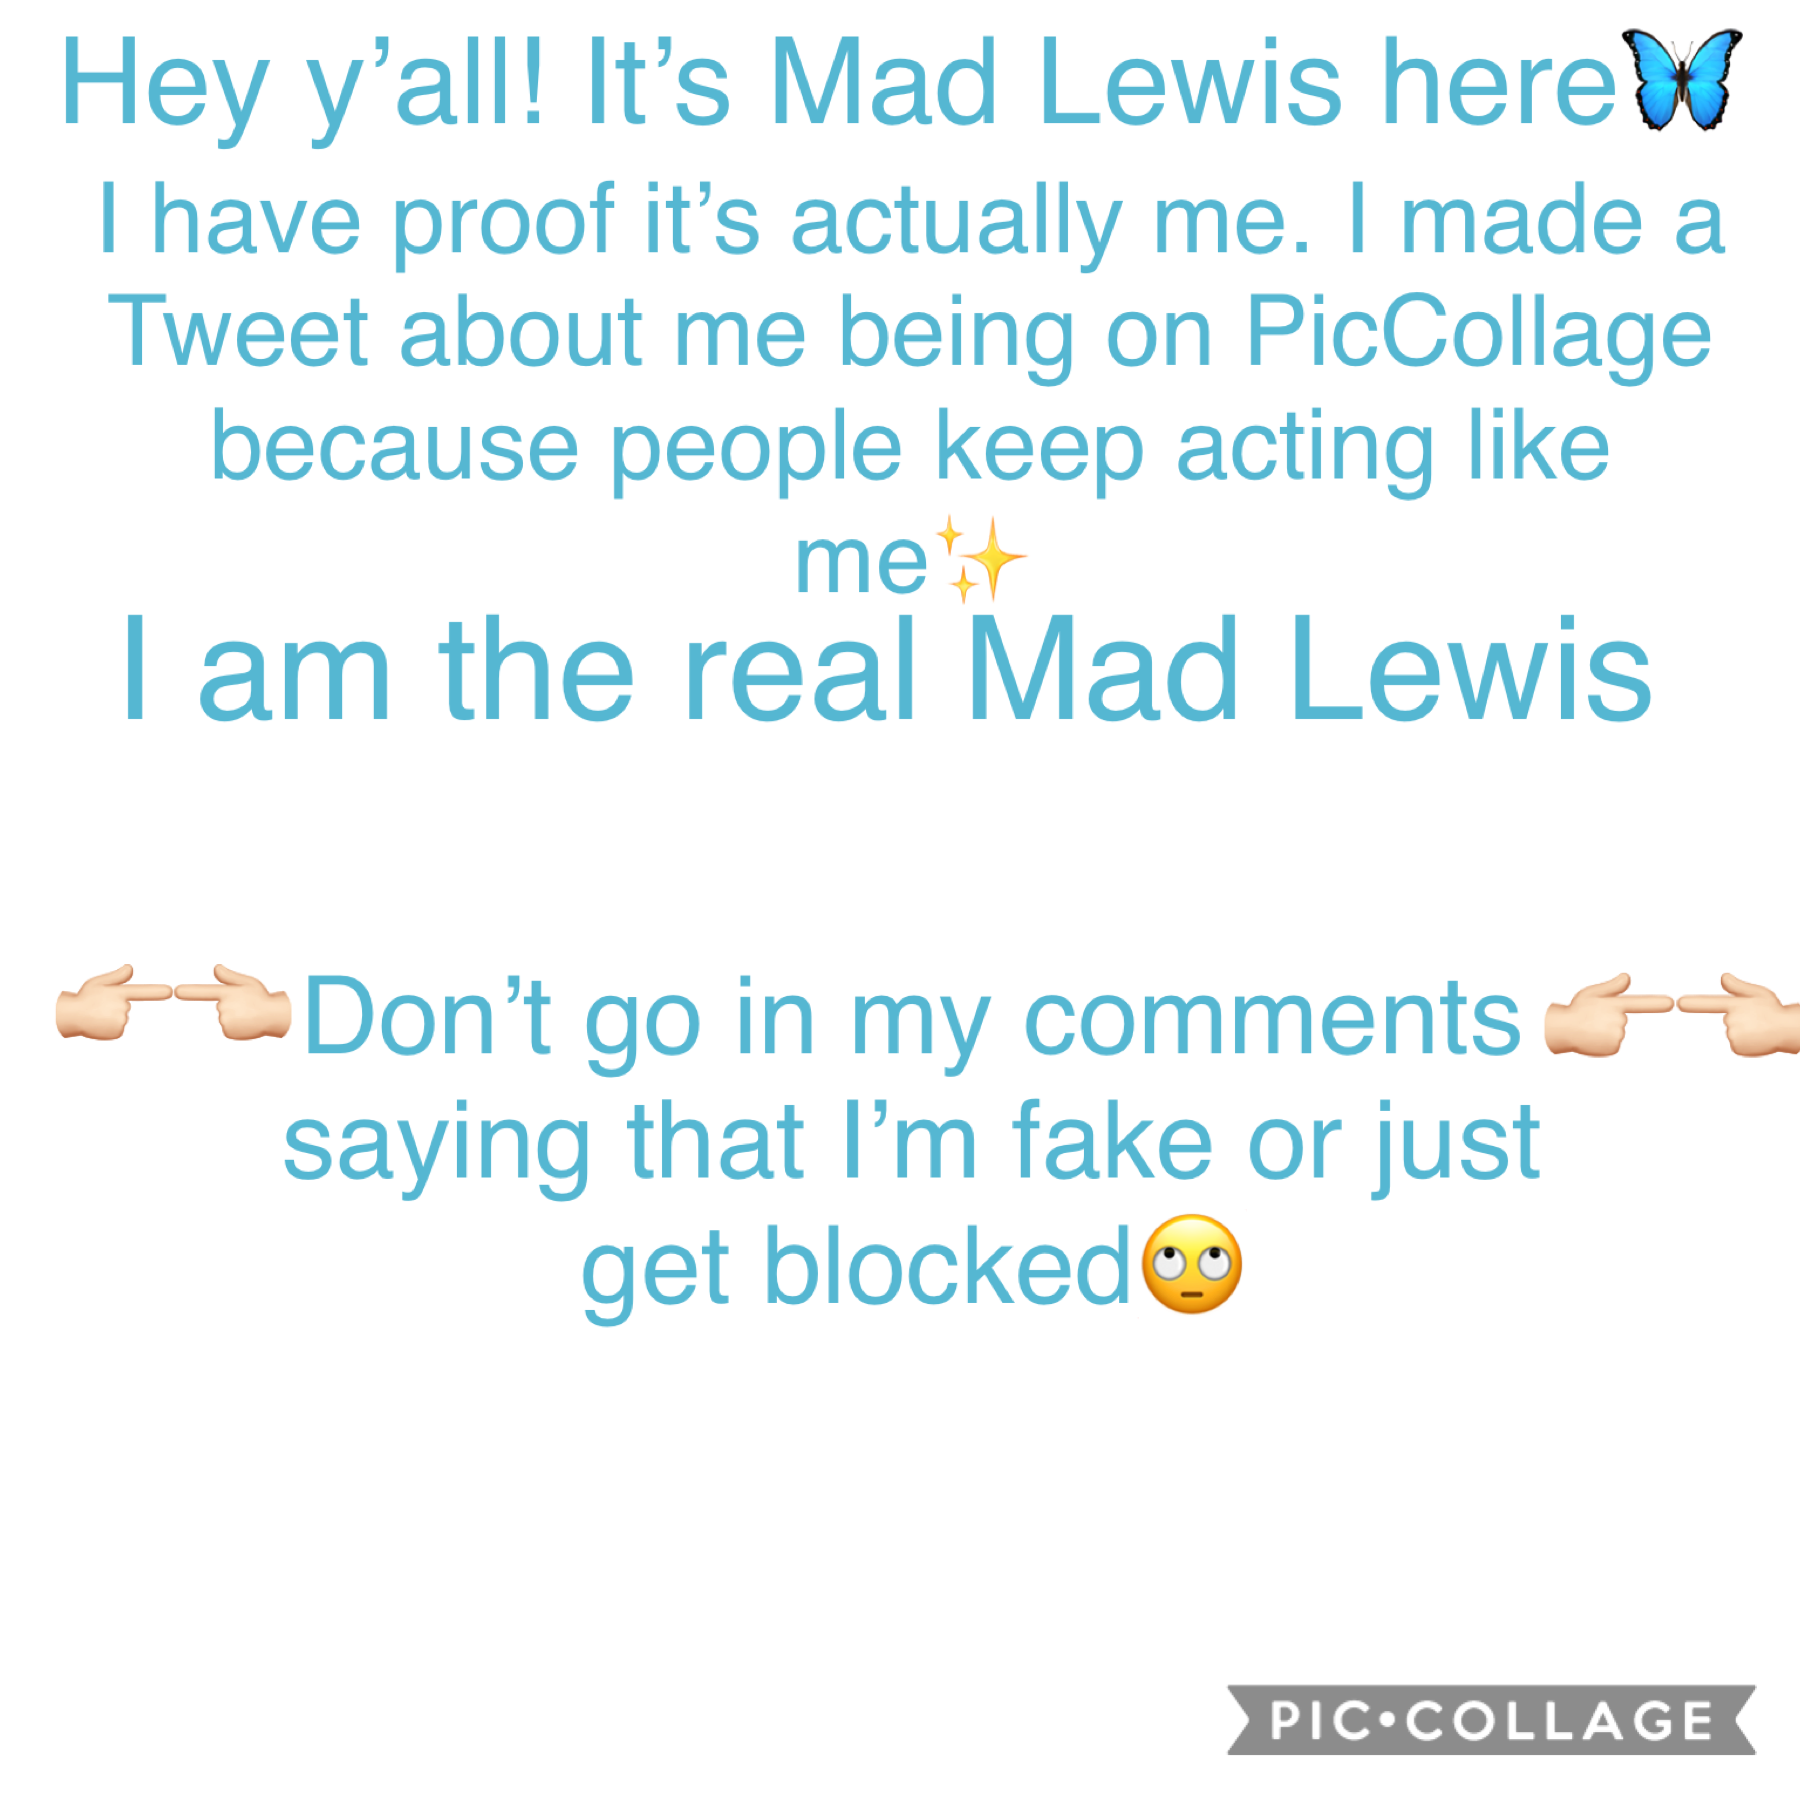 🦋Tap🦋
Call me fake then just get blocked, as simple as that🙃